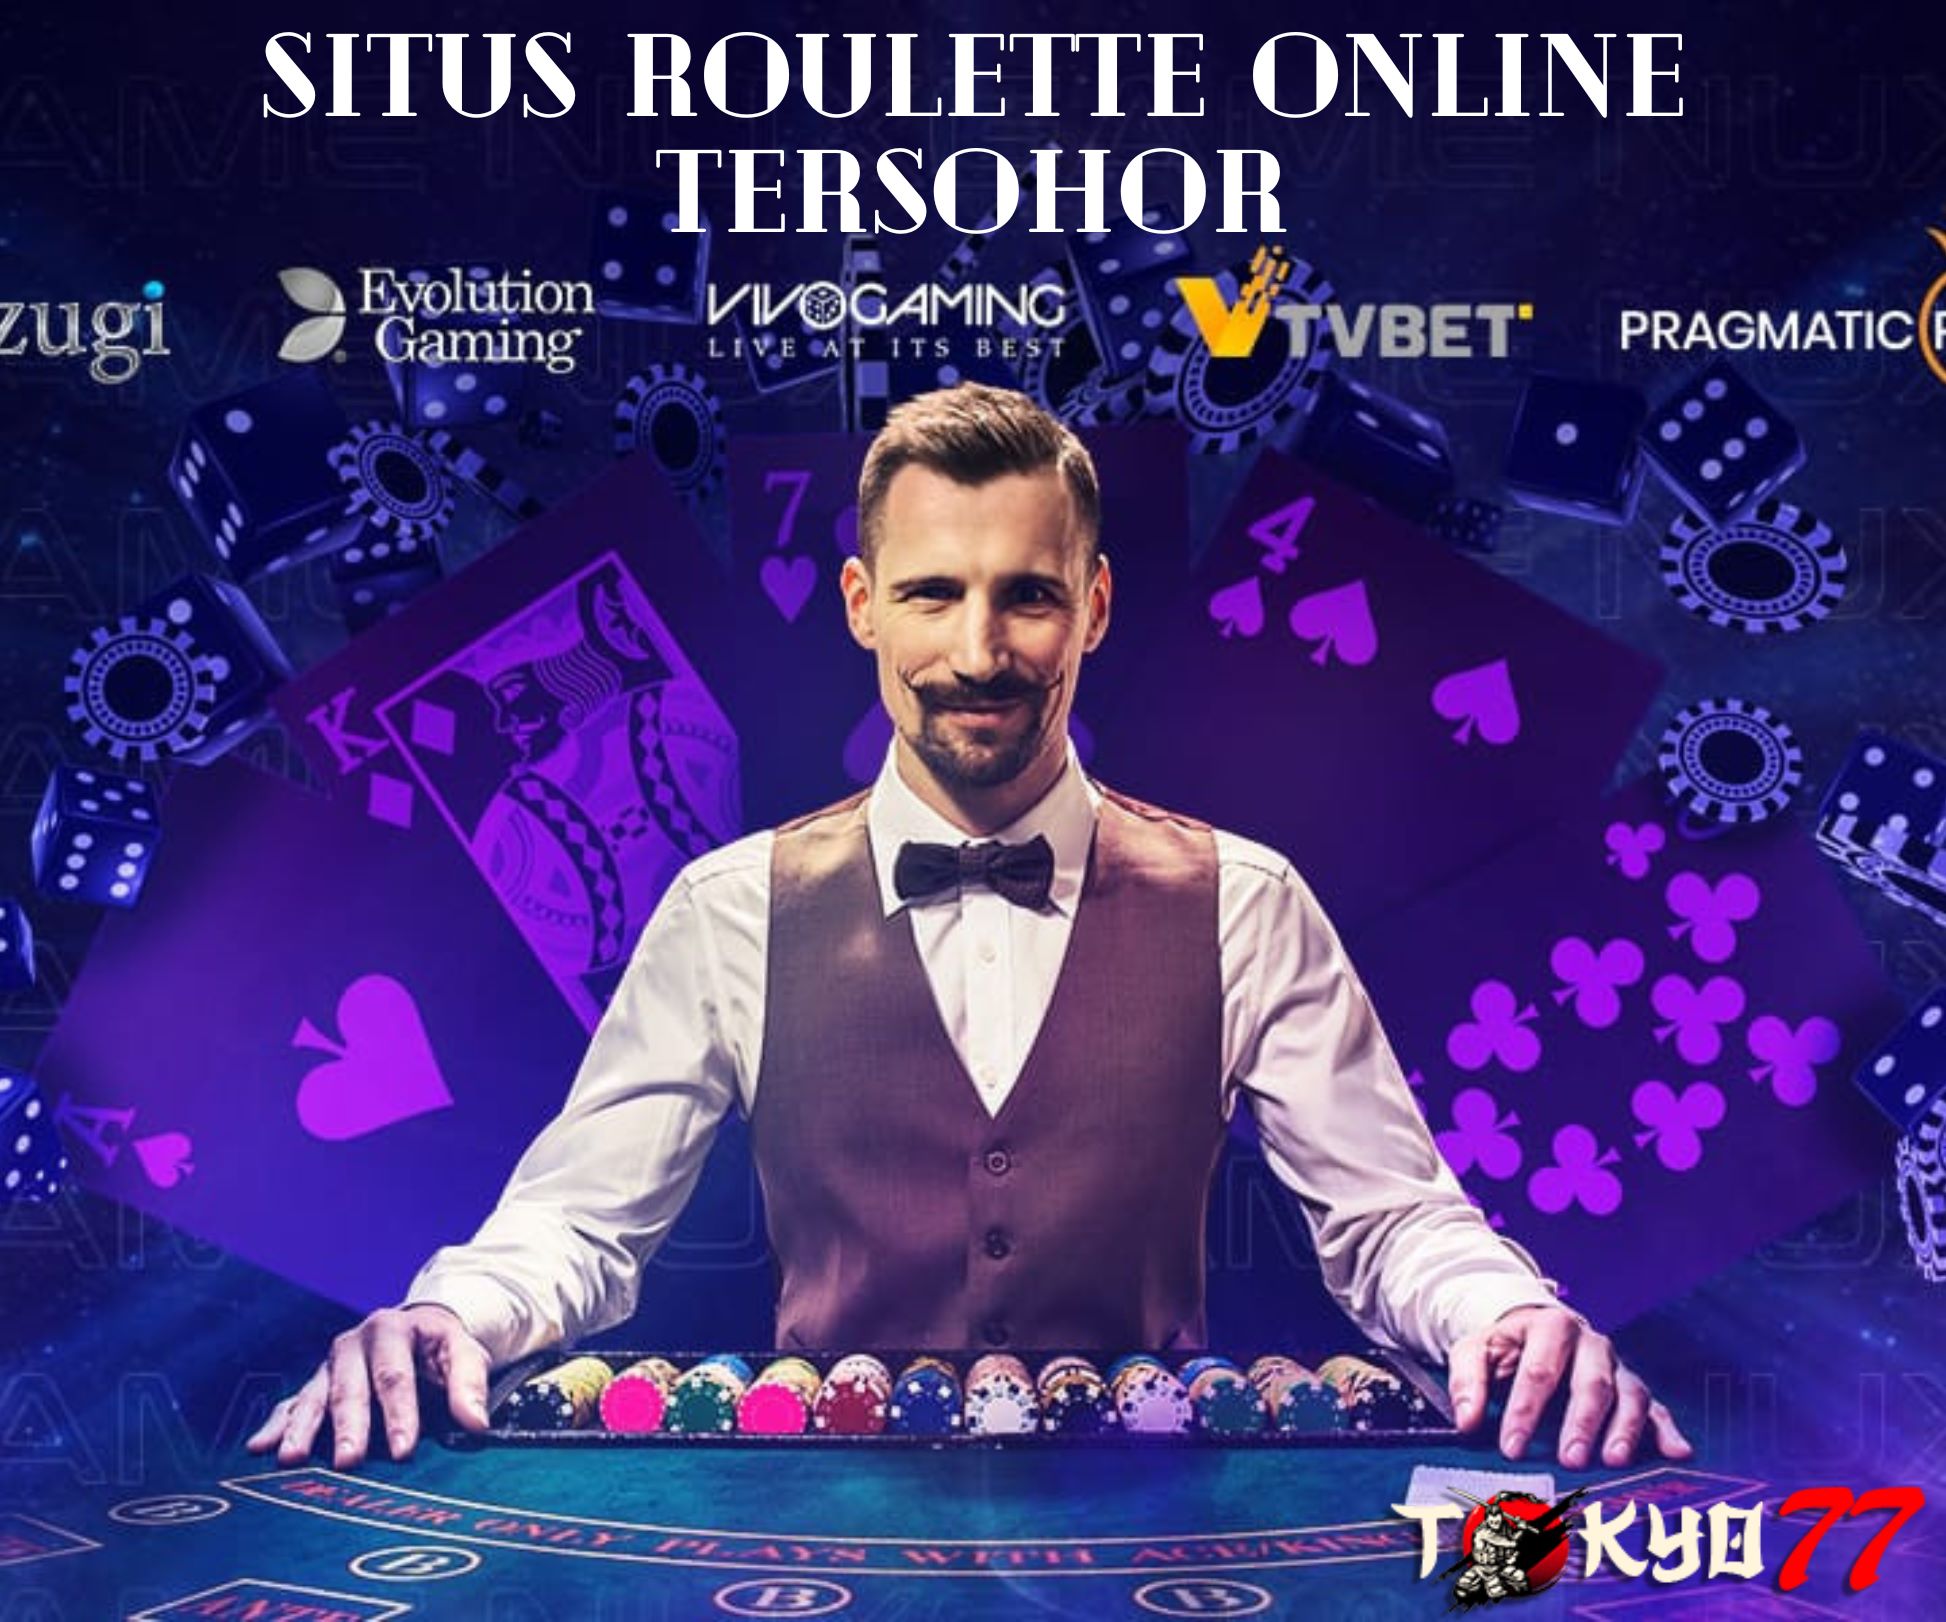 Exciting Tactics for Playing Roulette Online without Losing